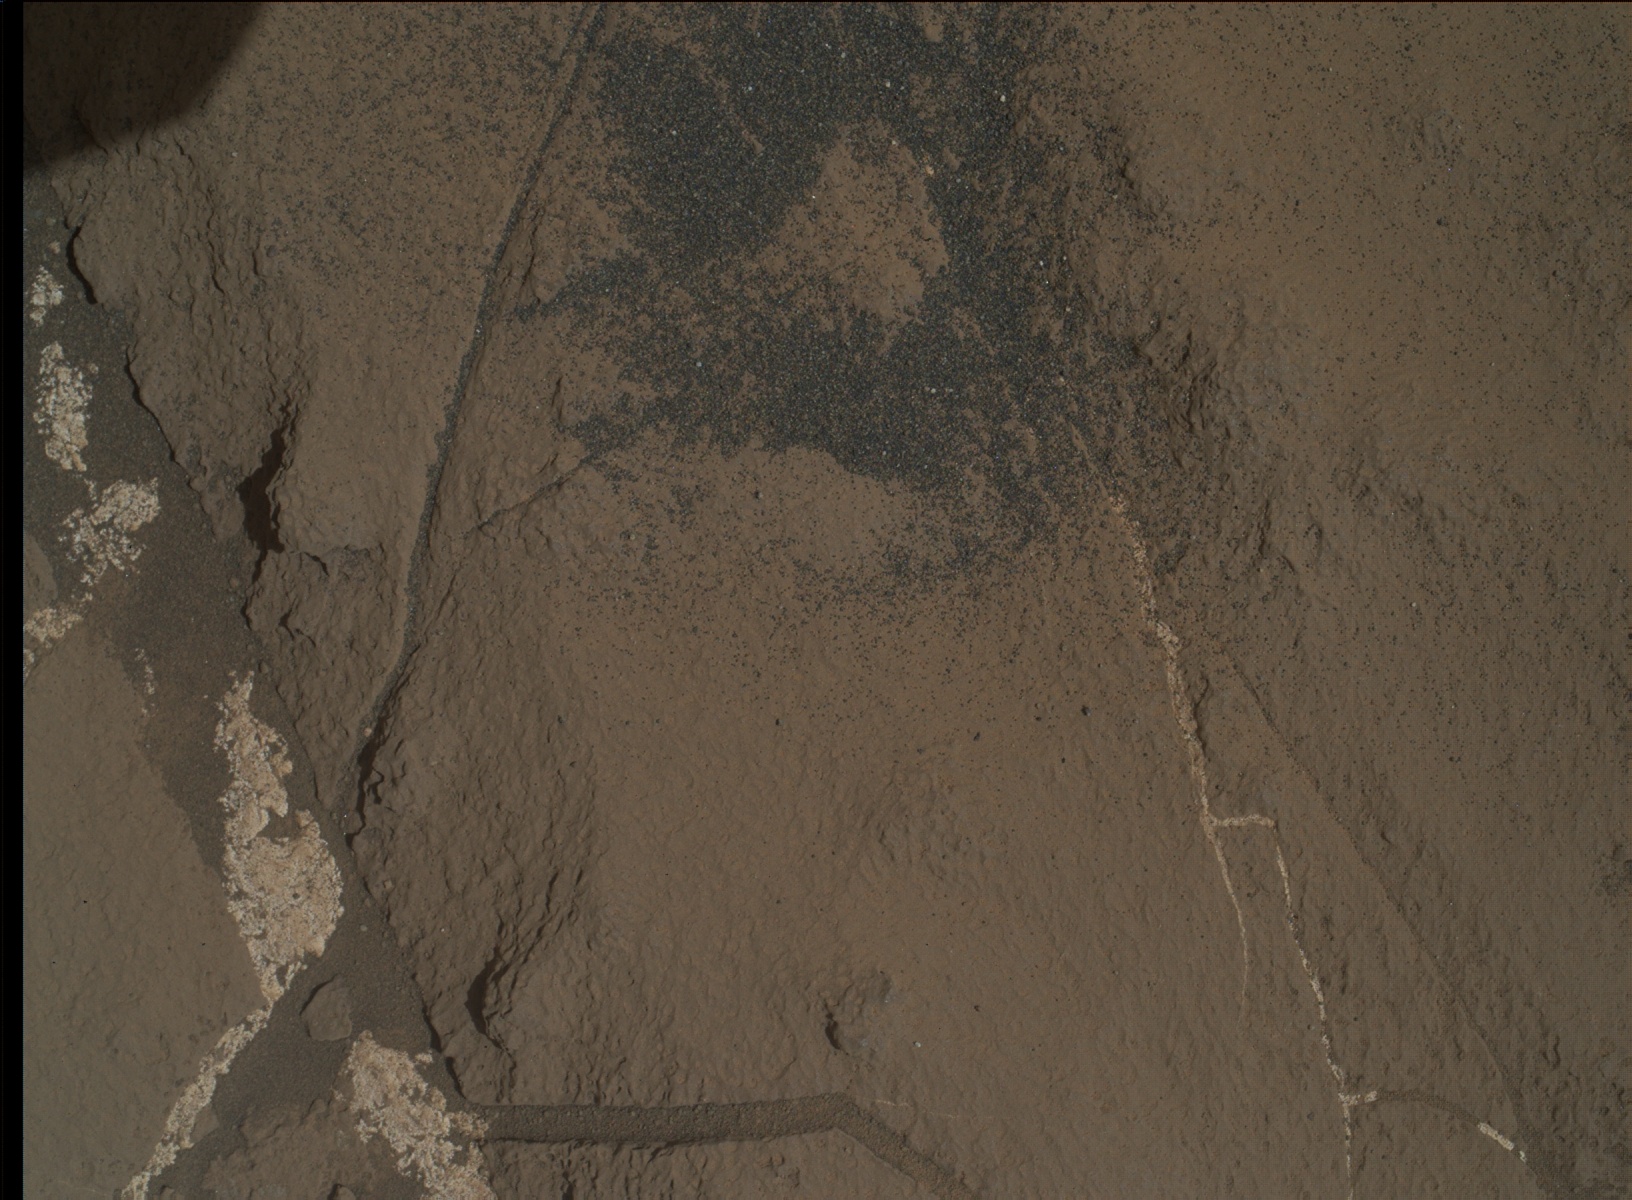 Nasa's Mars rover Curiosity acquired this image using its Mars Hand Lens Imager (MAHLI) on Sol 1251